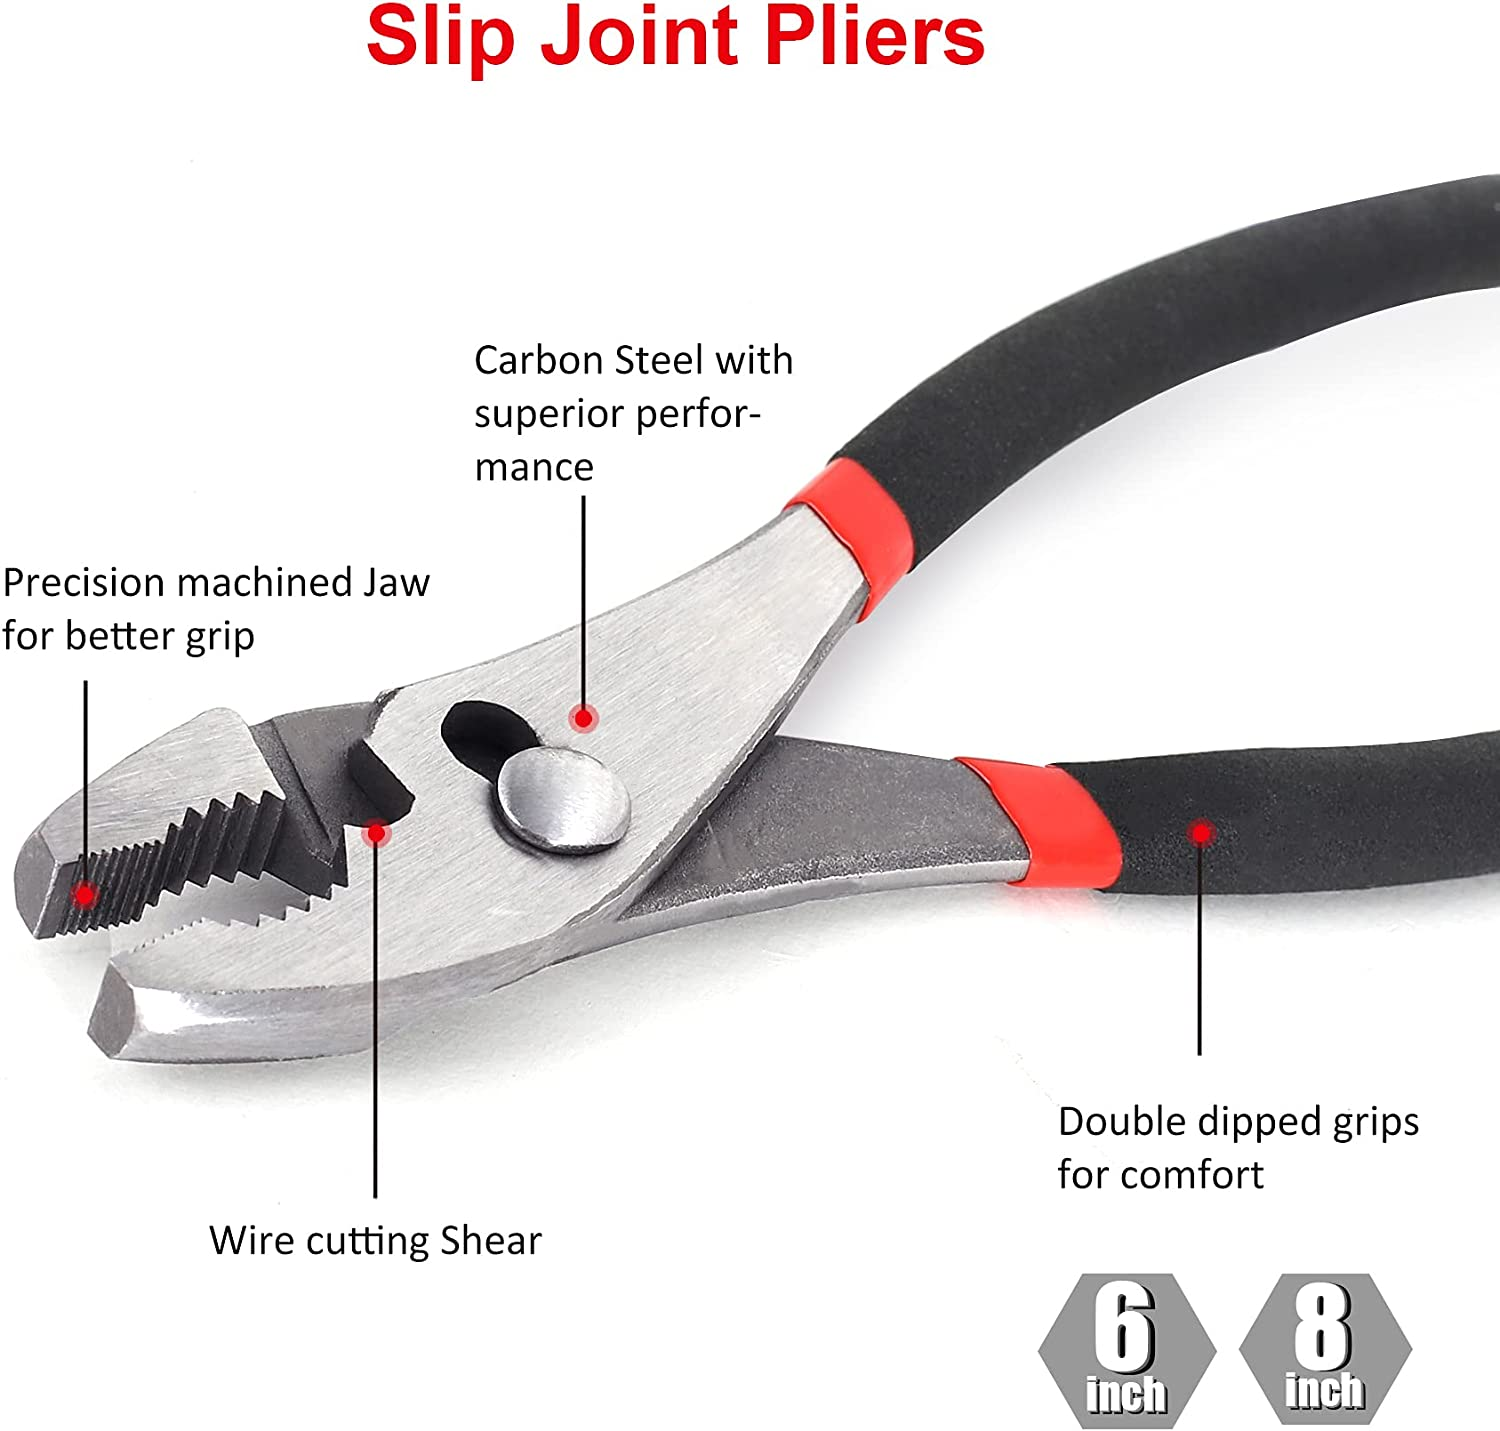 7-Piece Utility Pliers and Wrench Set, Includes Slip Joint Pliers, Long Nose Pliers, Diagonal Pliers, Groove Joint Pliers, Linesman Pliers and Adjustable Wrench, Dipped Handle